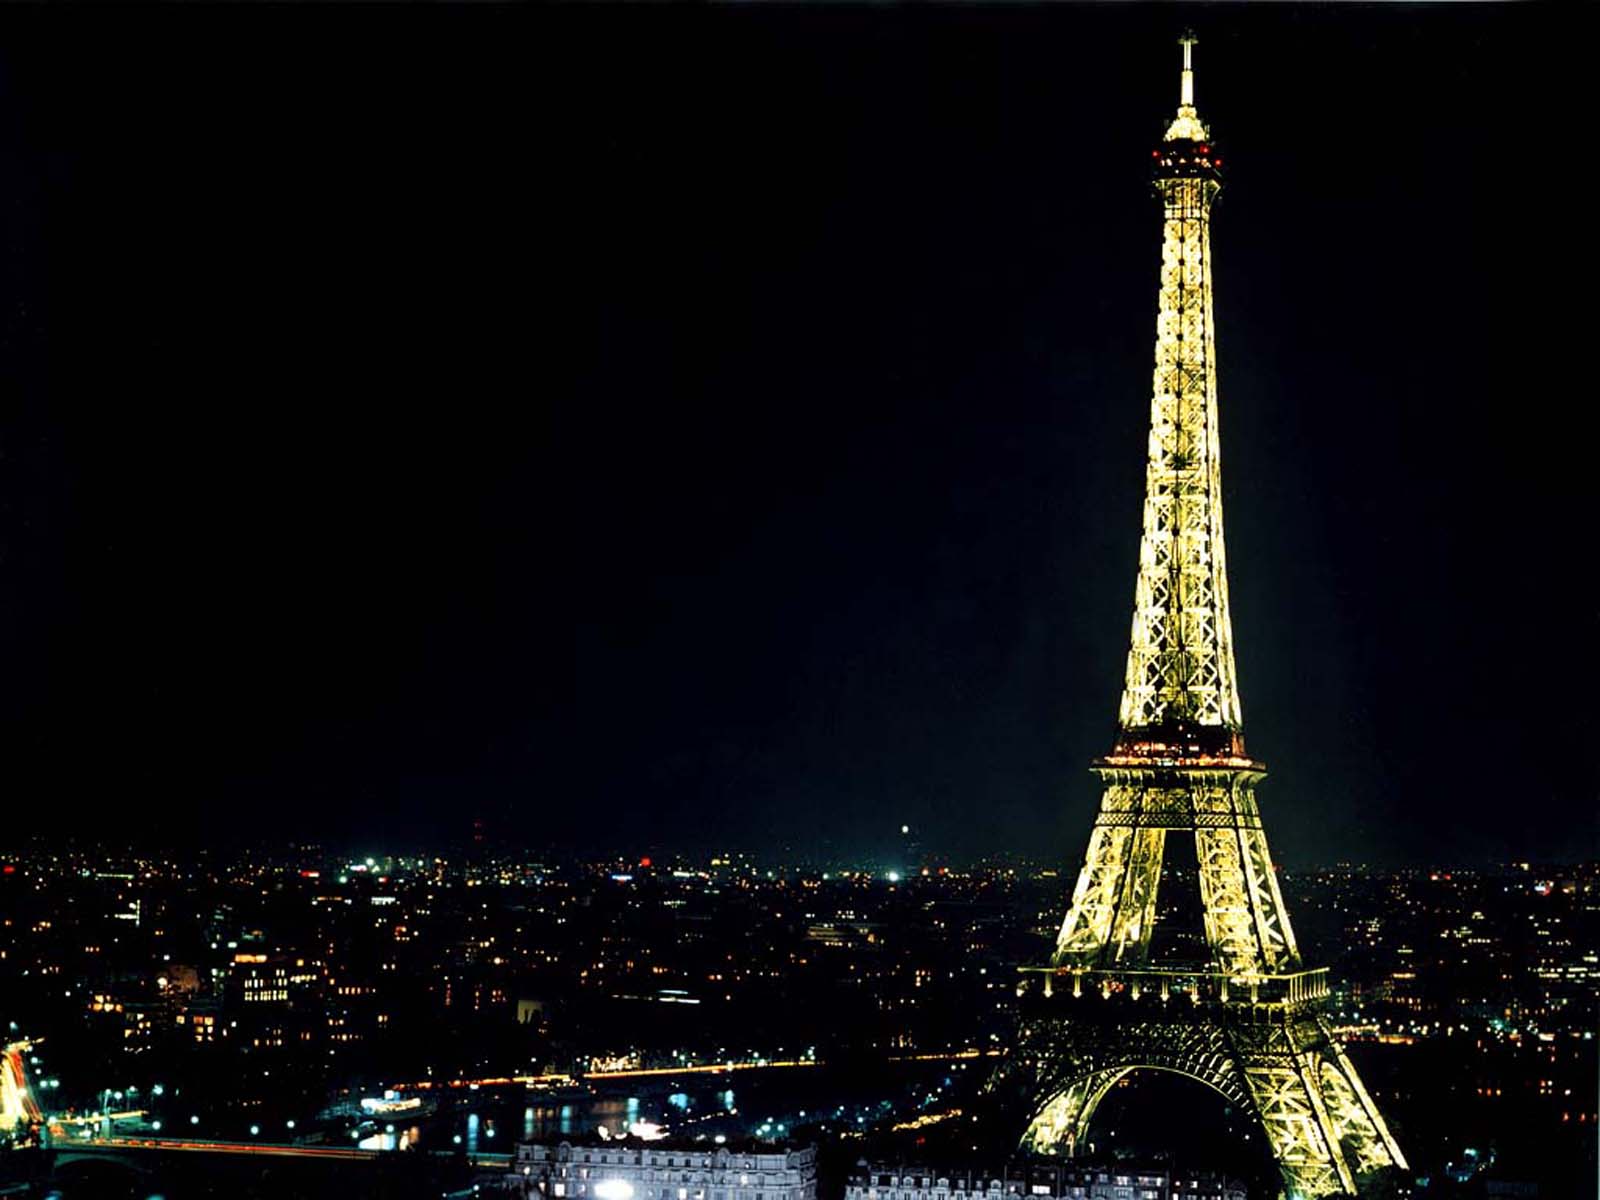 Eiffel Tower and Paris, France at night